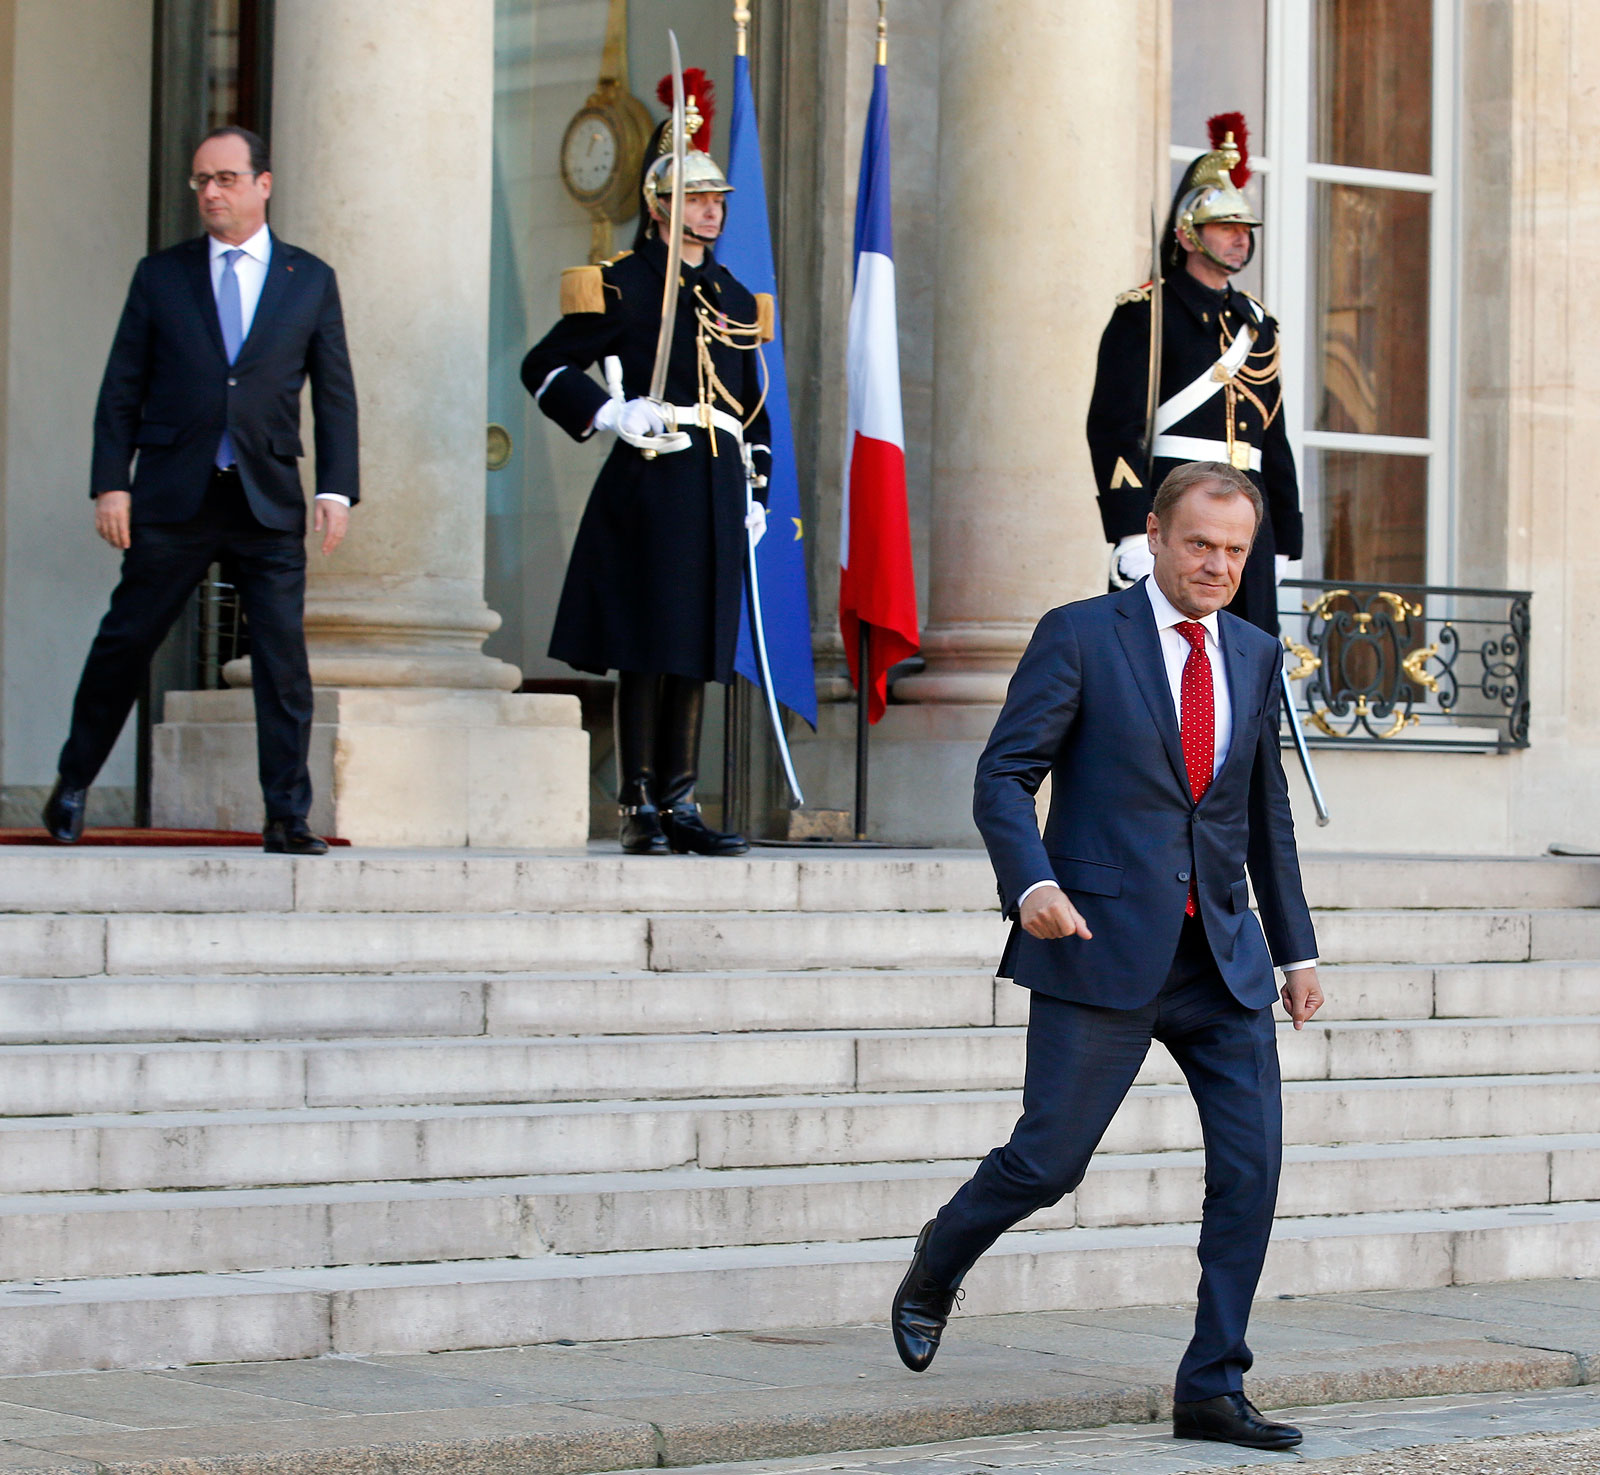 European Council President Donald Tusk leaves the Elysee Palace following a meeting with French President Francois Hollande in Paris, France, November 23, 2015